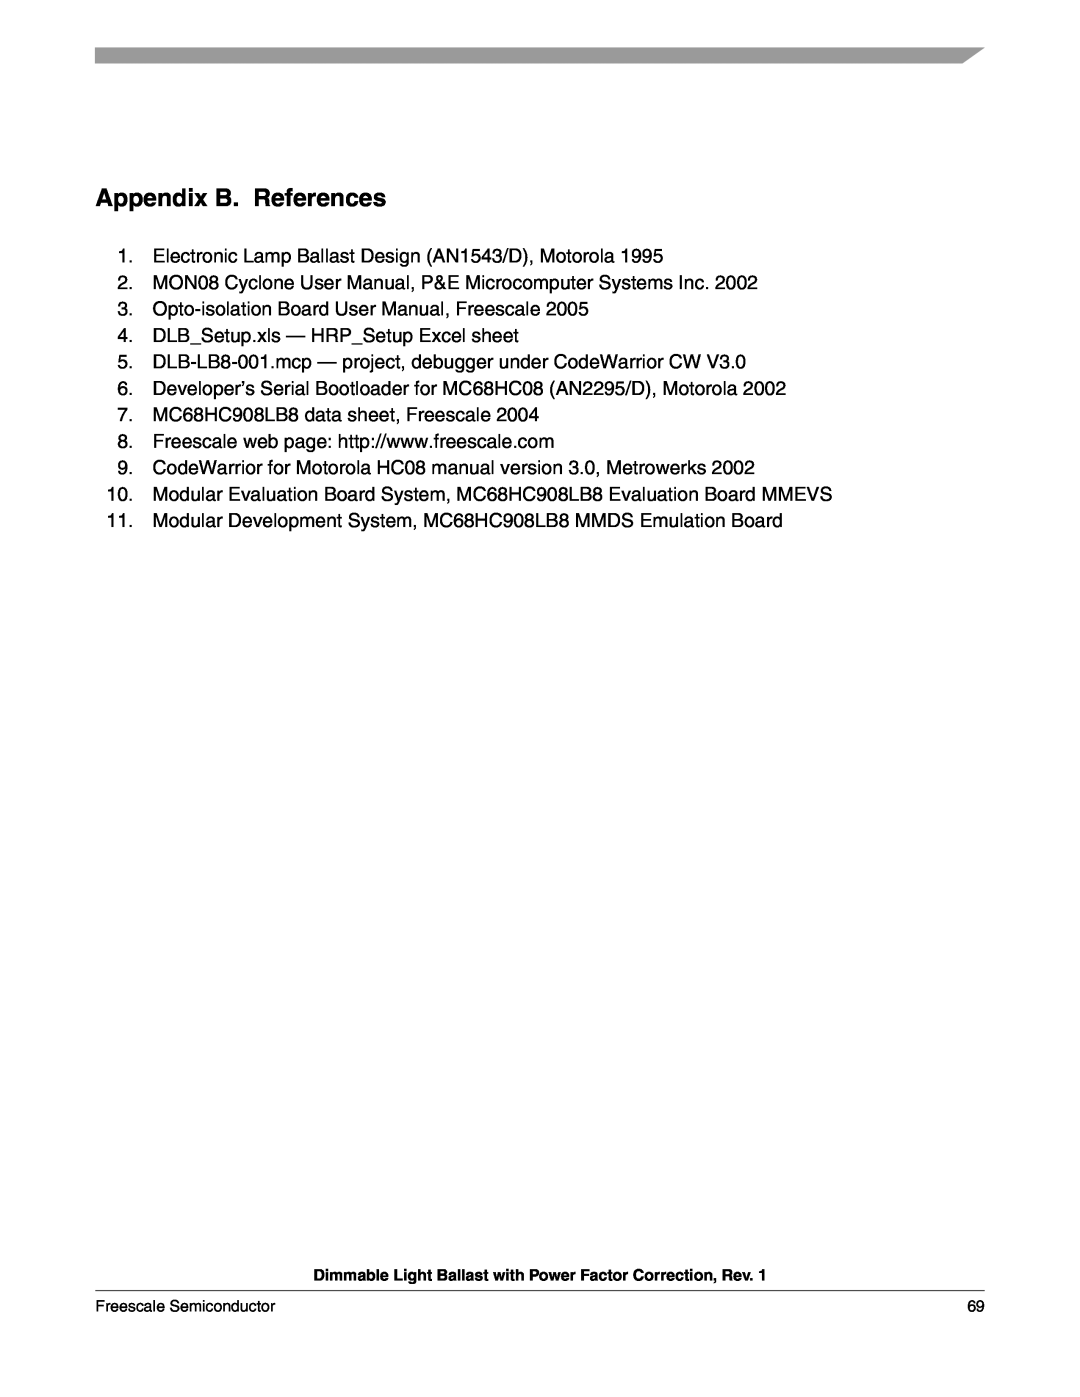 Freescale Semiconductor M68HC08 manual Appendix B. References 